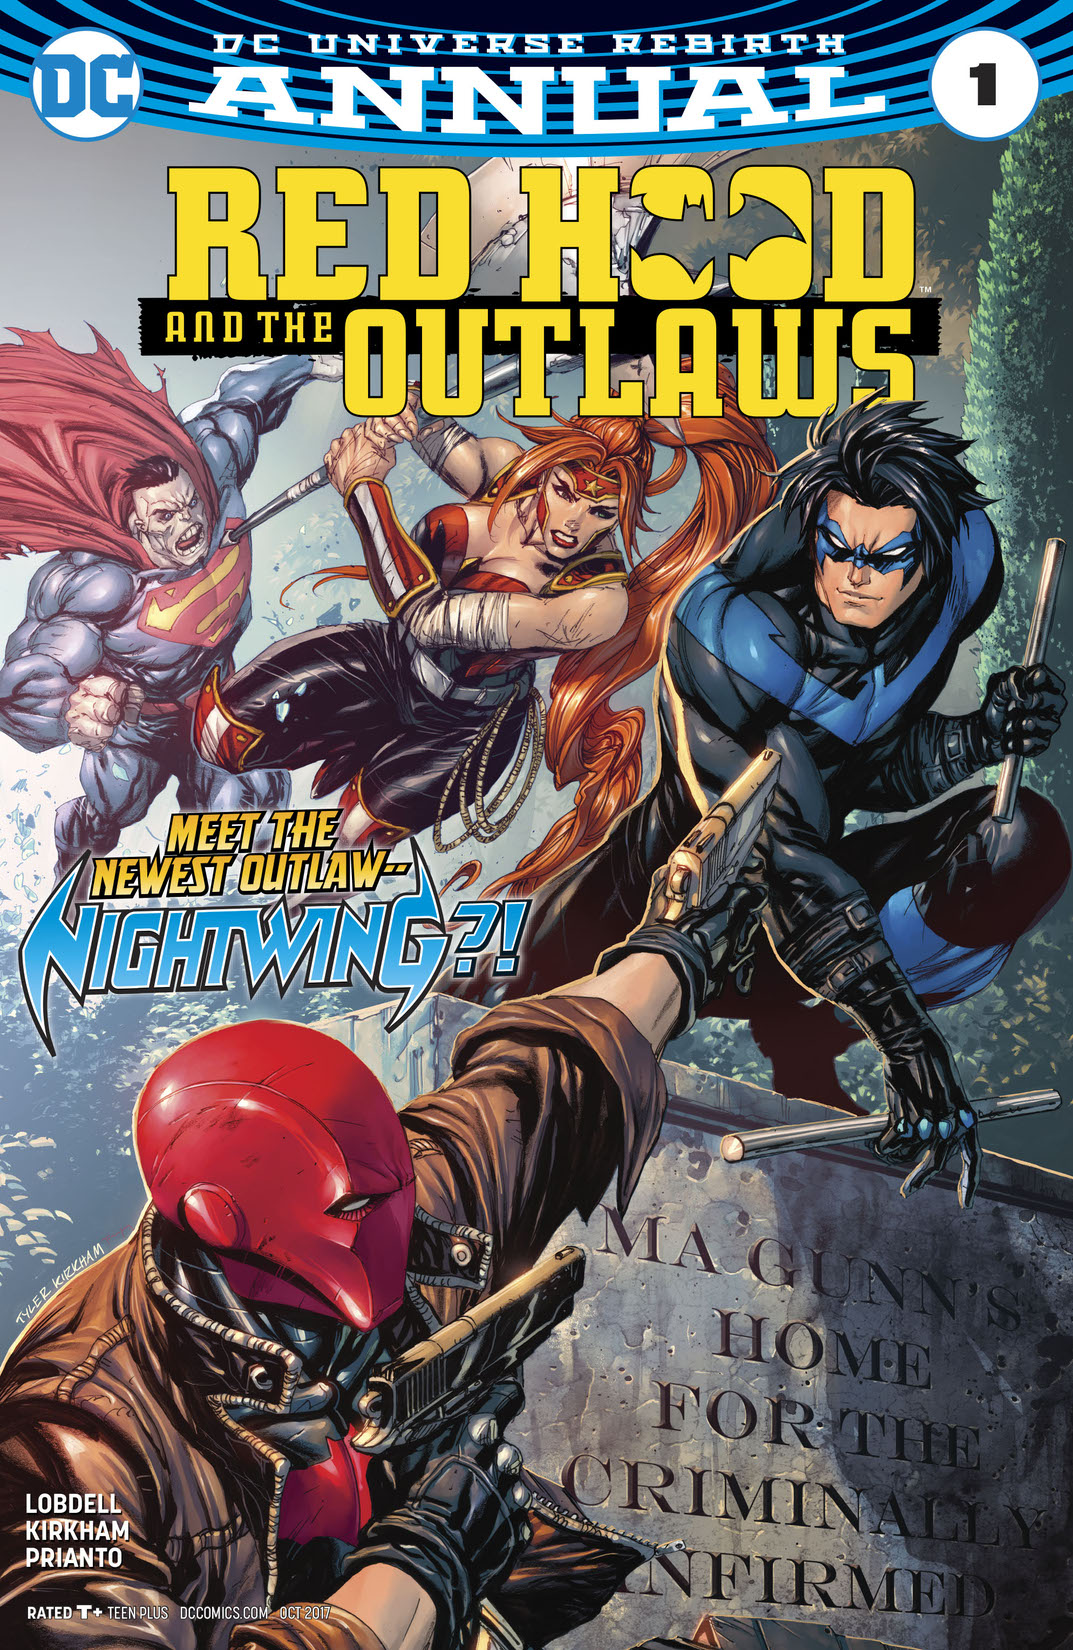 Red Hood and the Outlaws Annual (2017-) #1 preview images